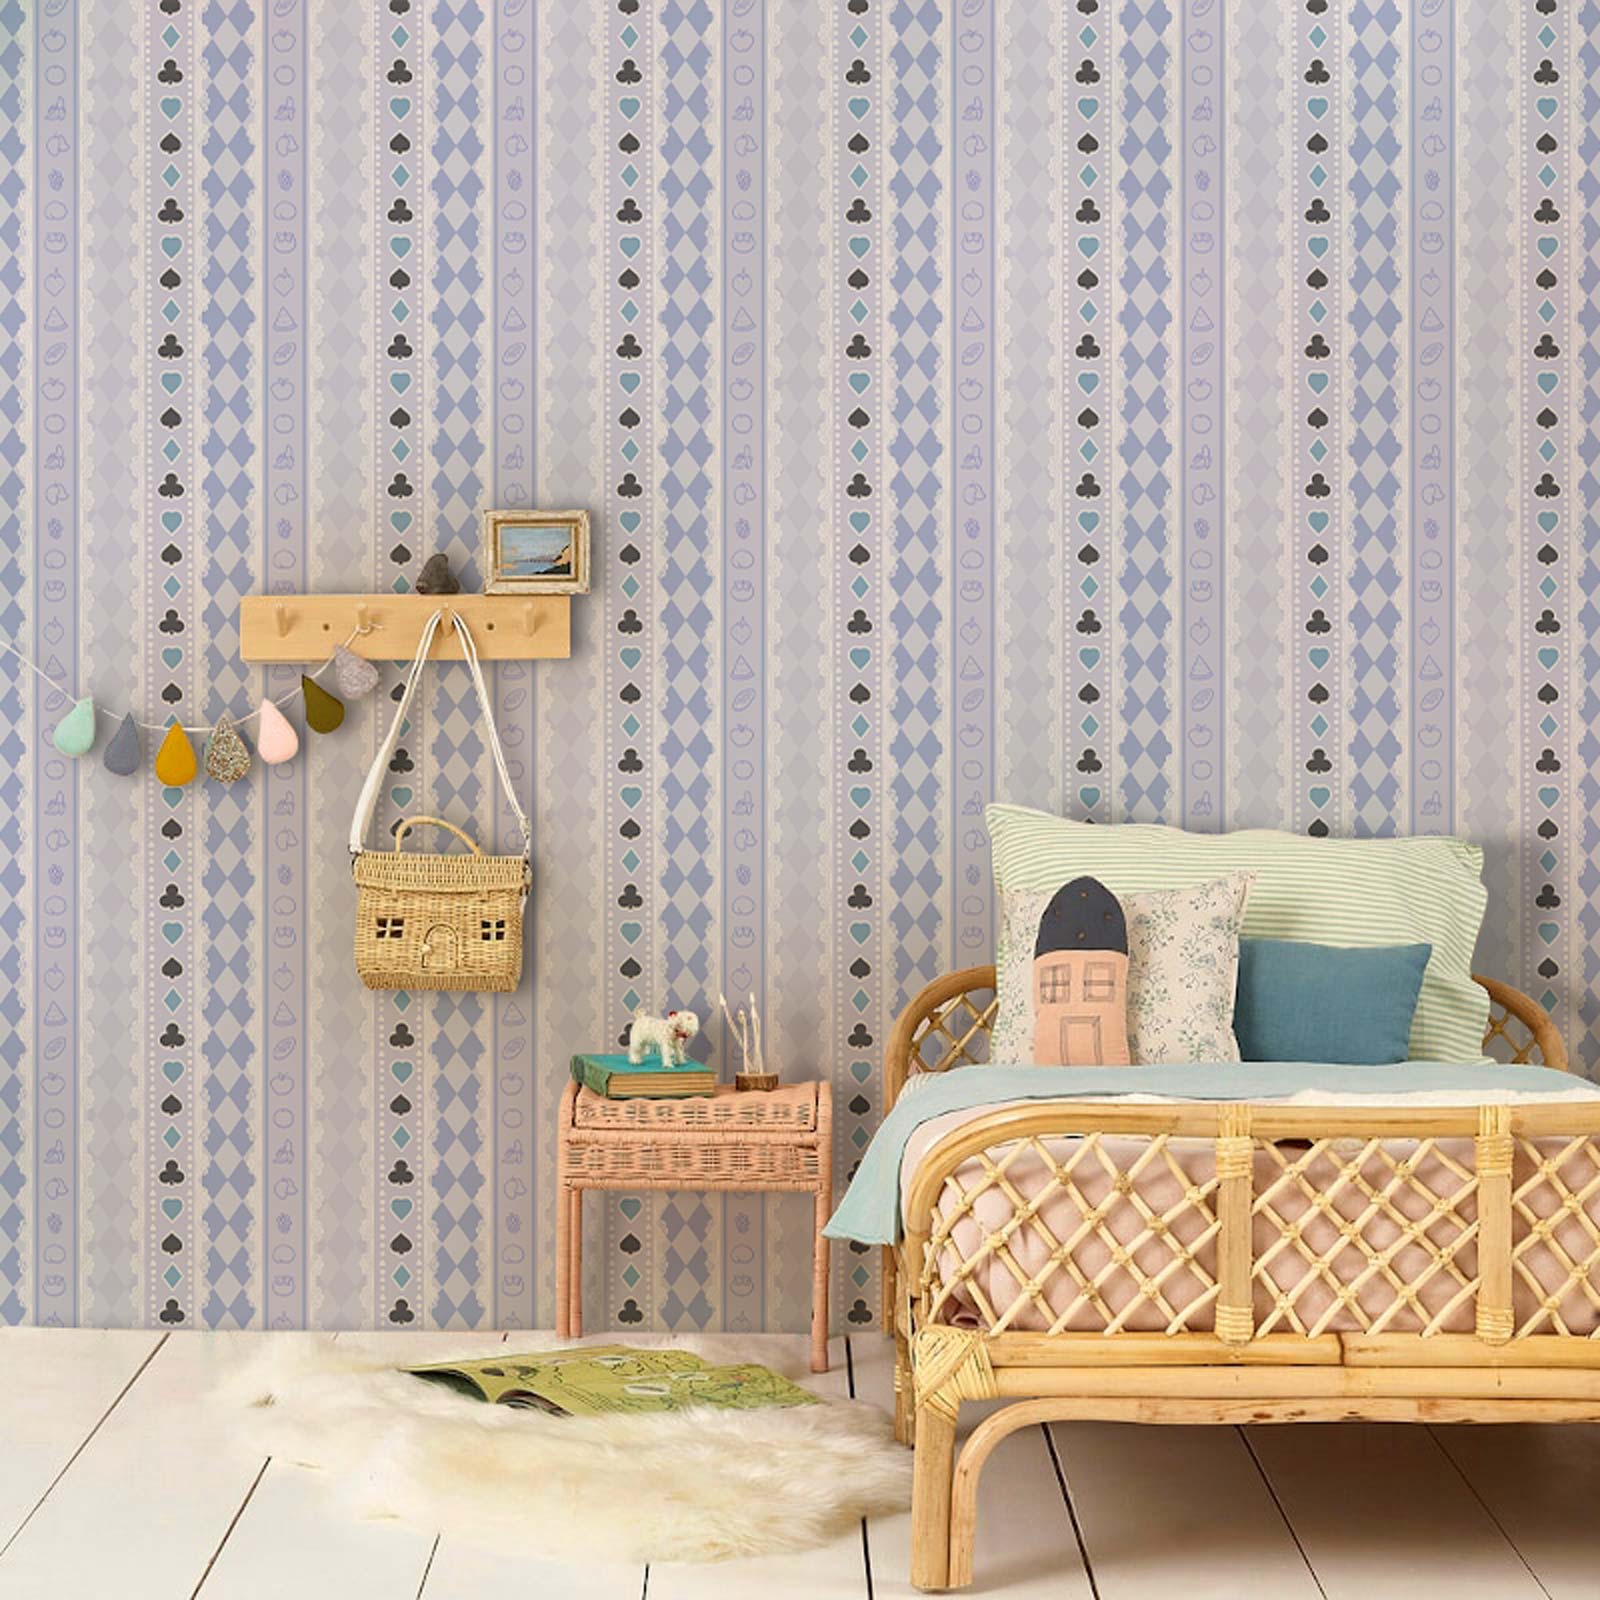 Wallpaper Mural with Repeated Pattern of Cards and Foods for Bedroom